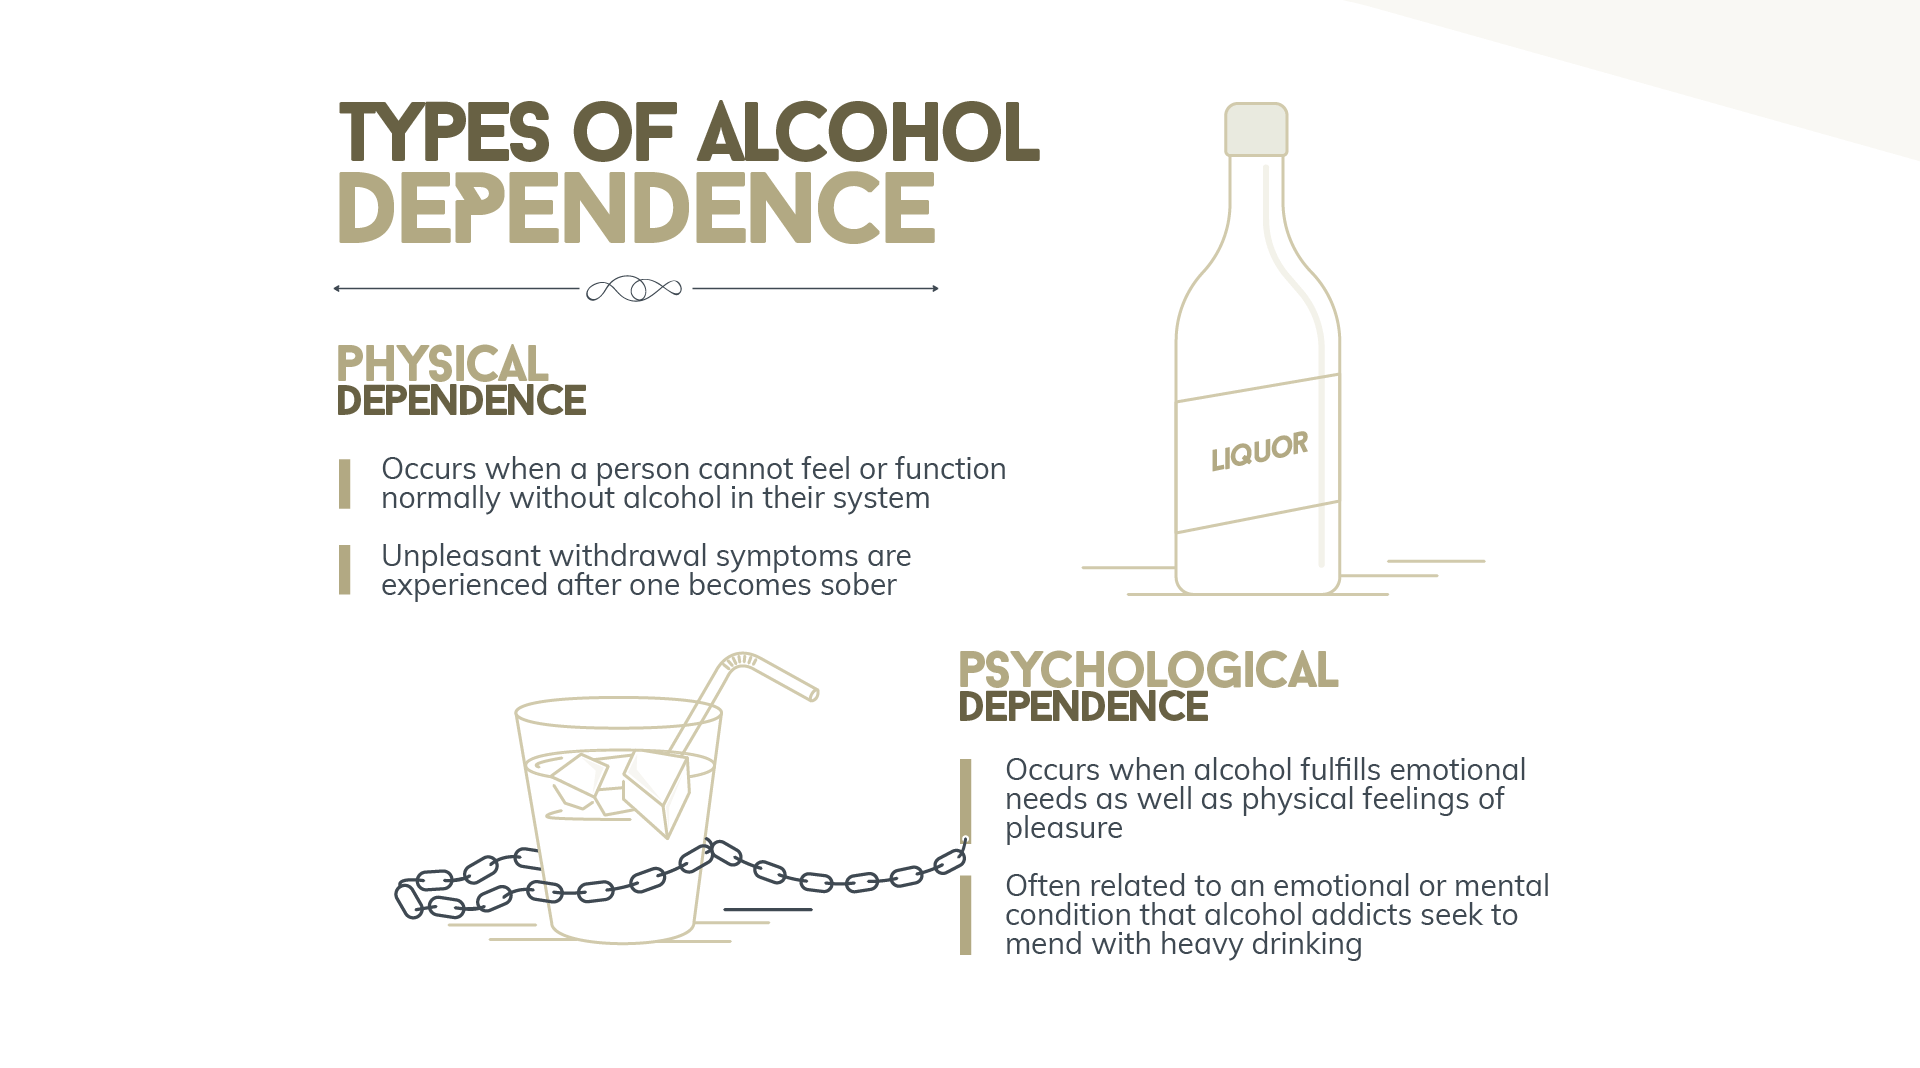 There are two types of alcohol dependence, one is called "physical dependence" which occurs when a person cannot feel or function normally without alcohol in their system in this dependency there is unpleasant withdrawal symptoms that are experienced after one becomes sober, the other dependency is called psychological dependence and it occurs when alcohol fulfills emotional needs as well as physical feelings of pleasure, psychological dependence is often related to an emotional or mental condition that alcohol addicts seek to mend with heavy drinking